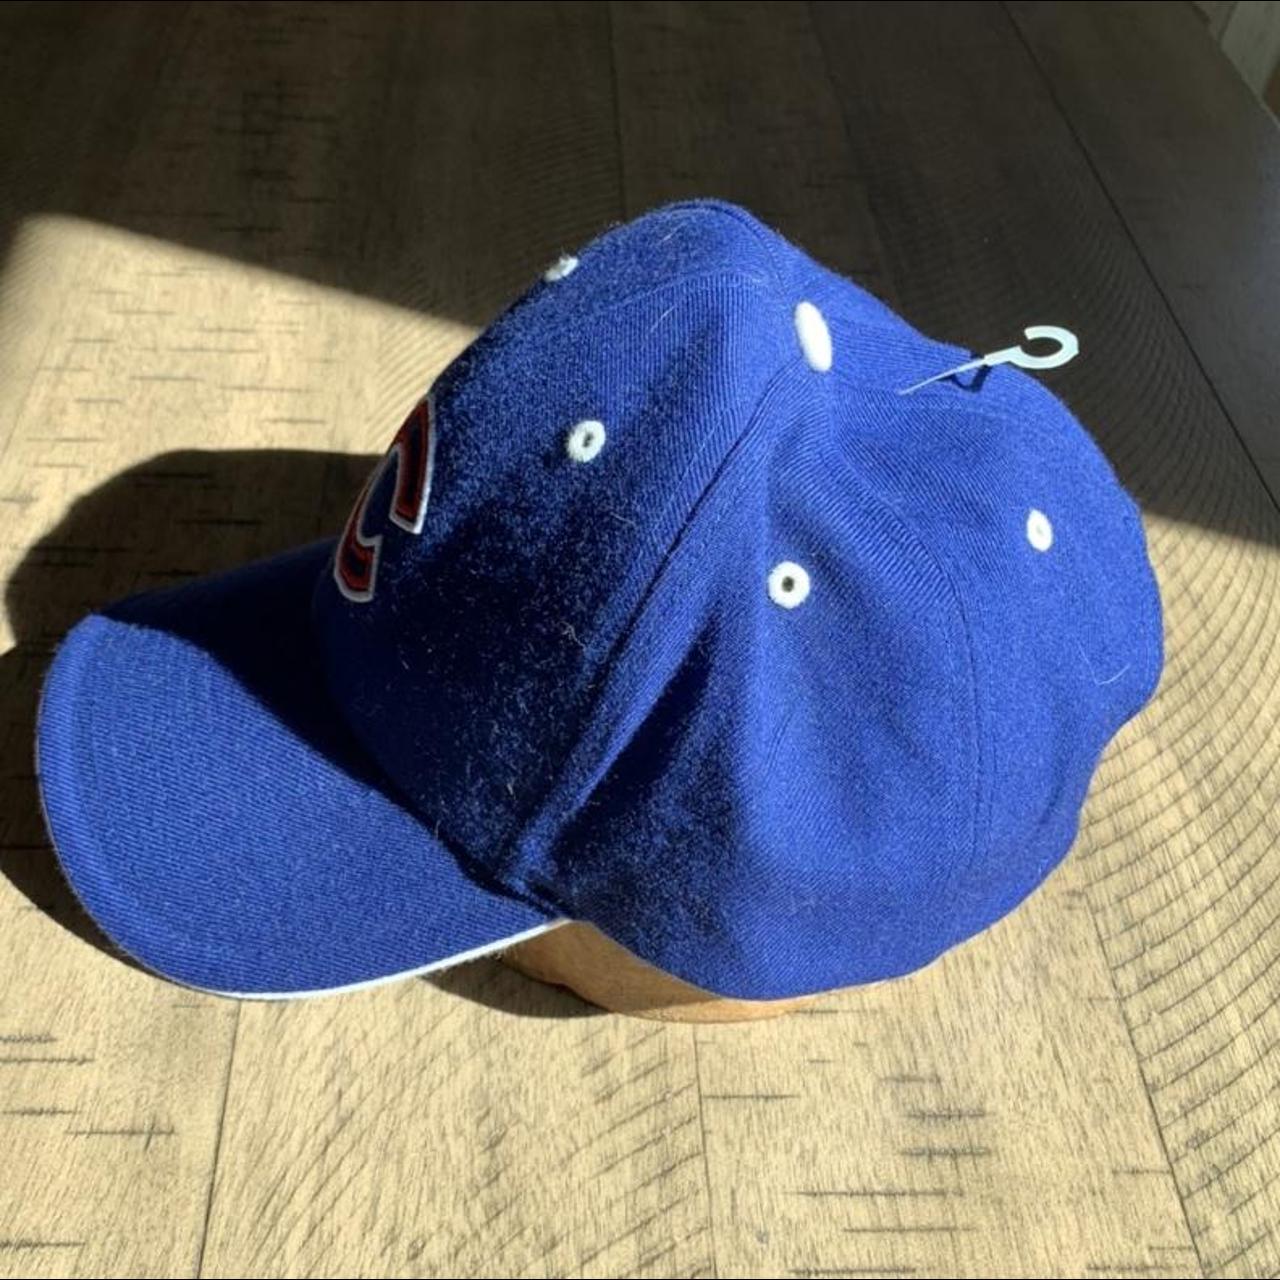 Chicago Cubs New Era Fitted Hat #cubs #newera - Depop